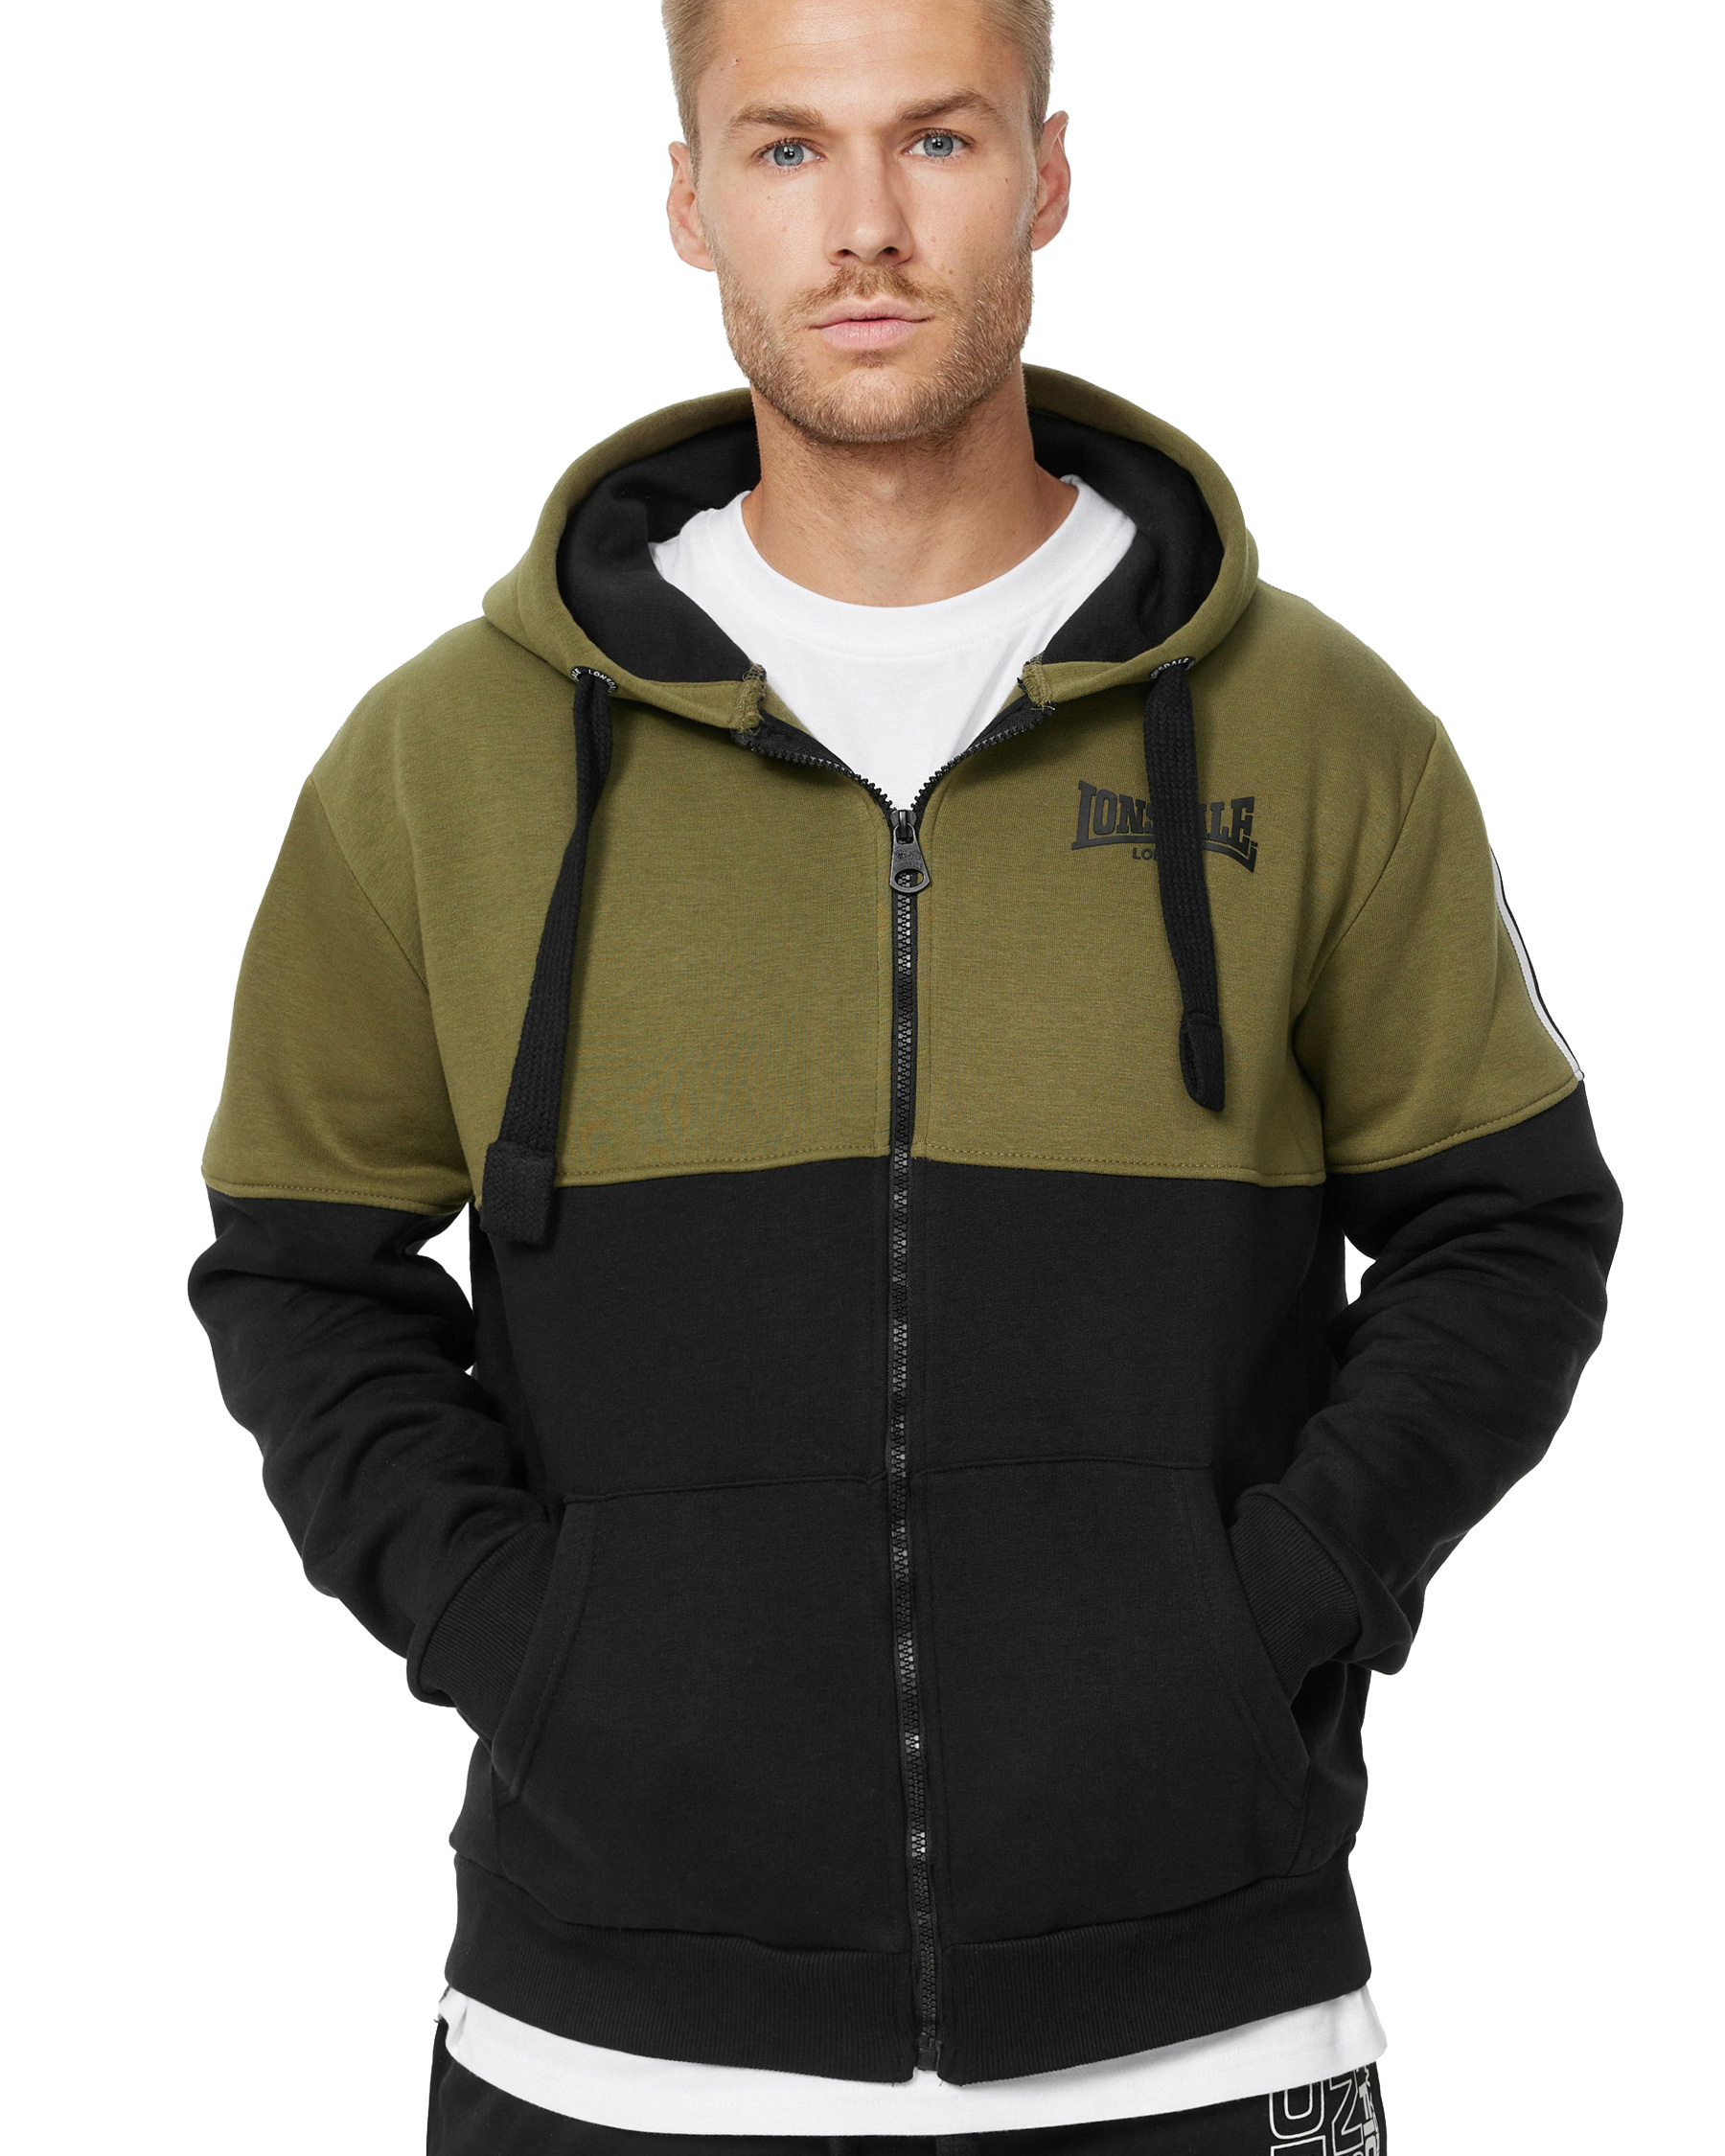 Lonsdale capuchon sweatjas Lucklawhill